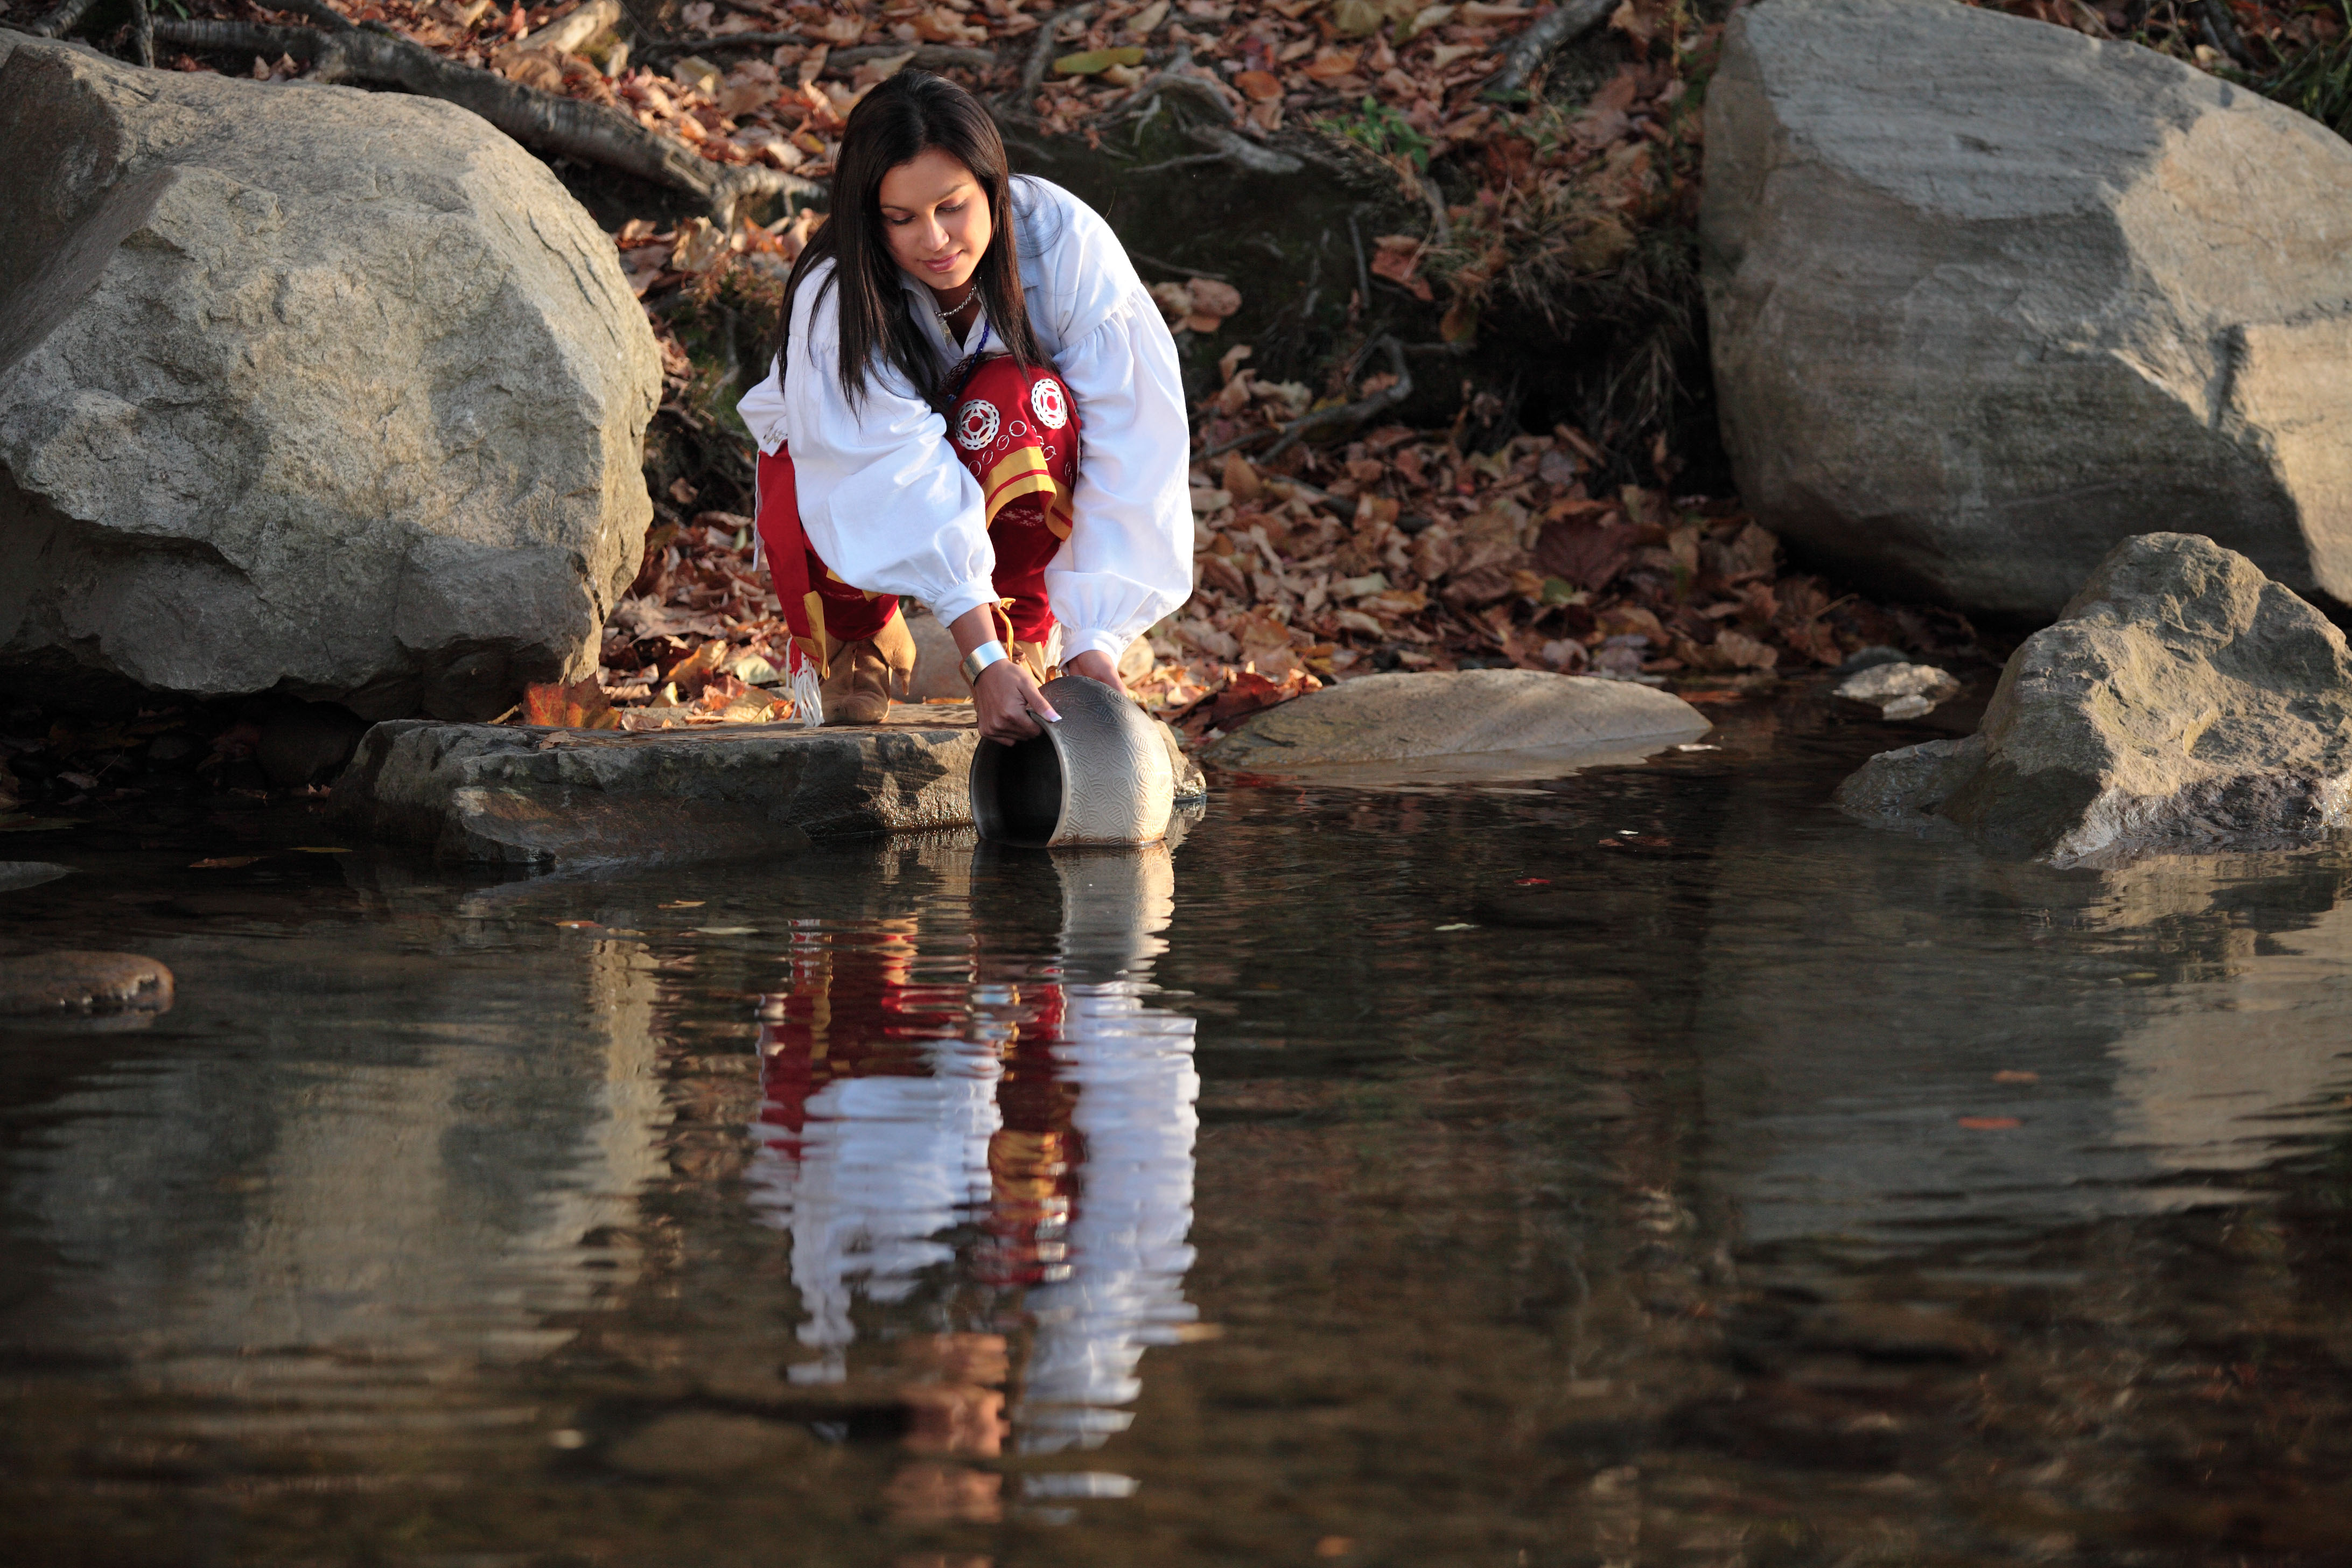 Kara Martin, Eastern Band of Cherokee Indians citizen, scoops water from the Oconaluftee River.